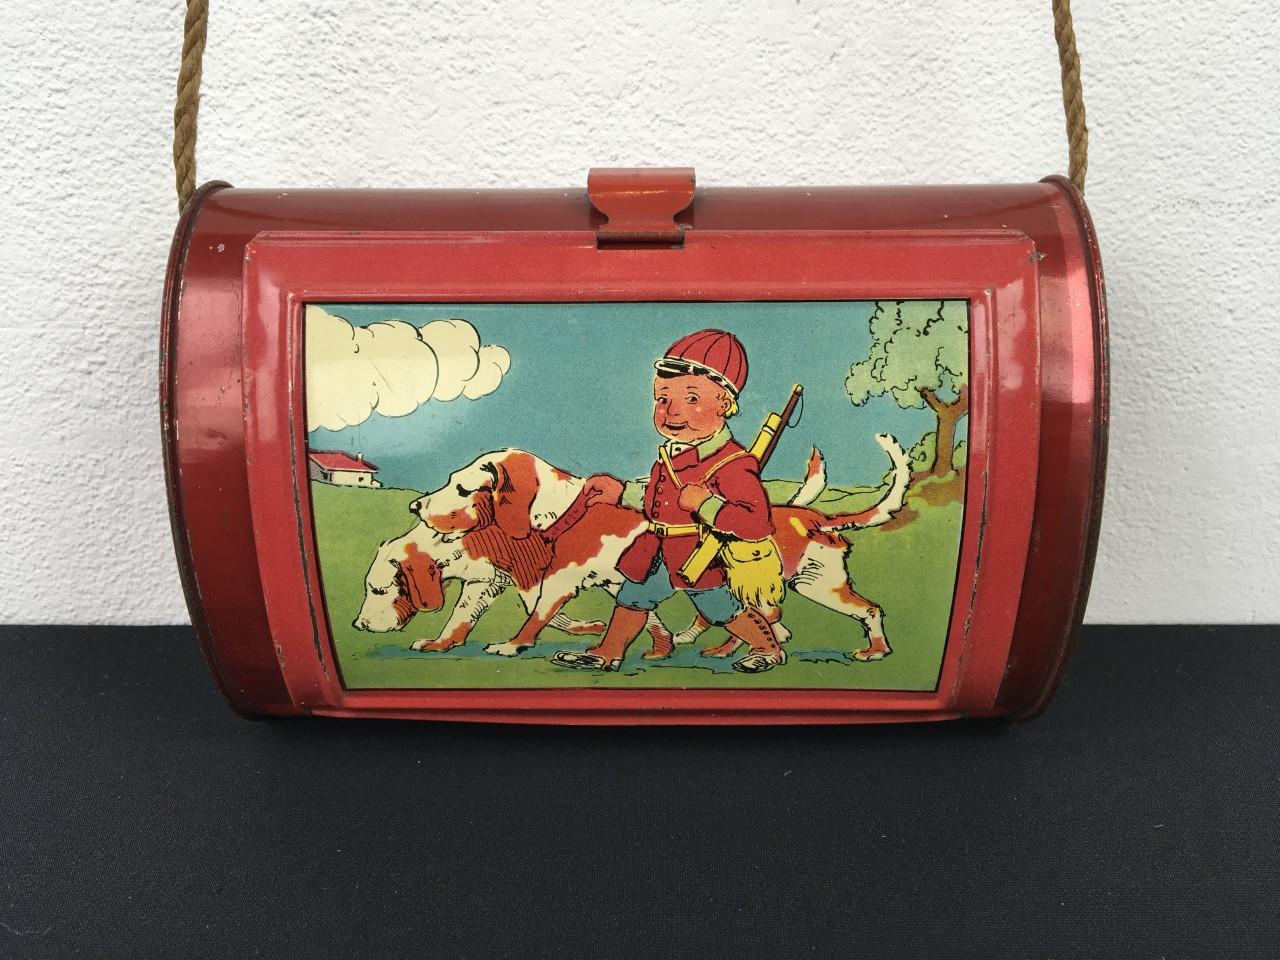 Antique botanize-barrel with a hunting boy and two large dogs. 
A red antique tin with a beautiful rounded and oval or cilinder shape with a lid and a string to wear around the neck. This lithographic tin box was made in Belgium. 

This beautiful